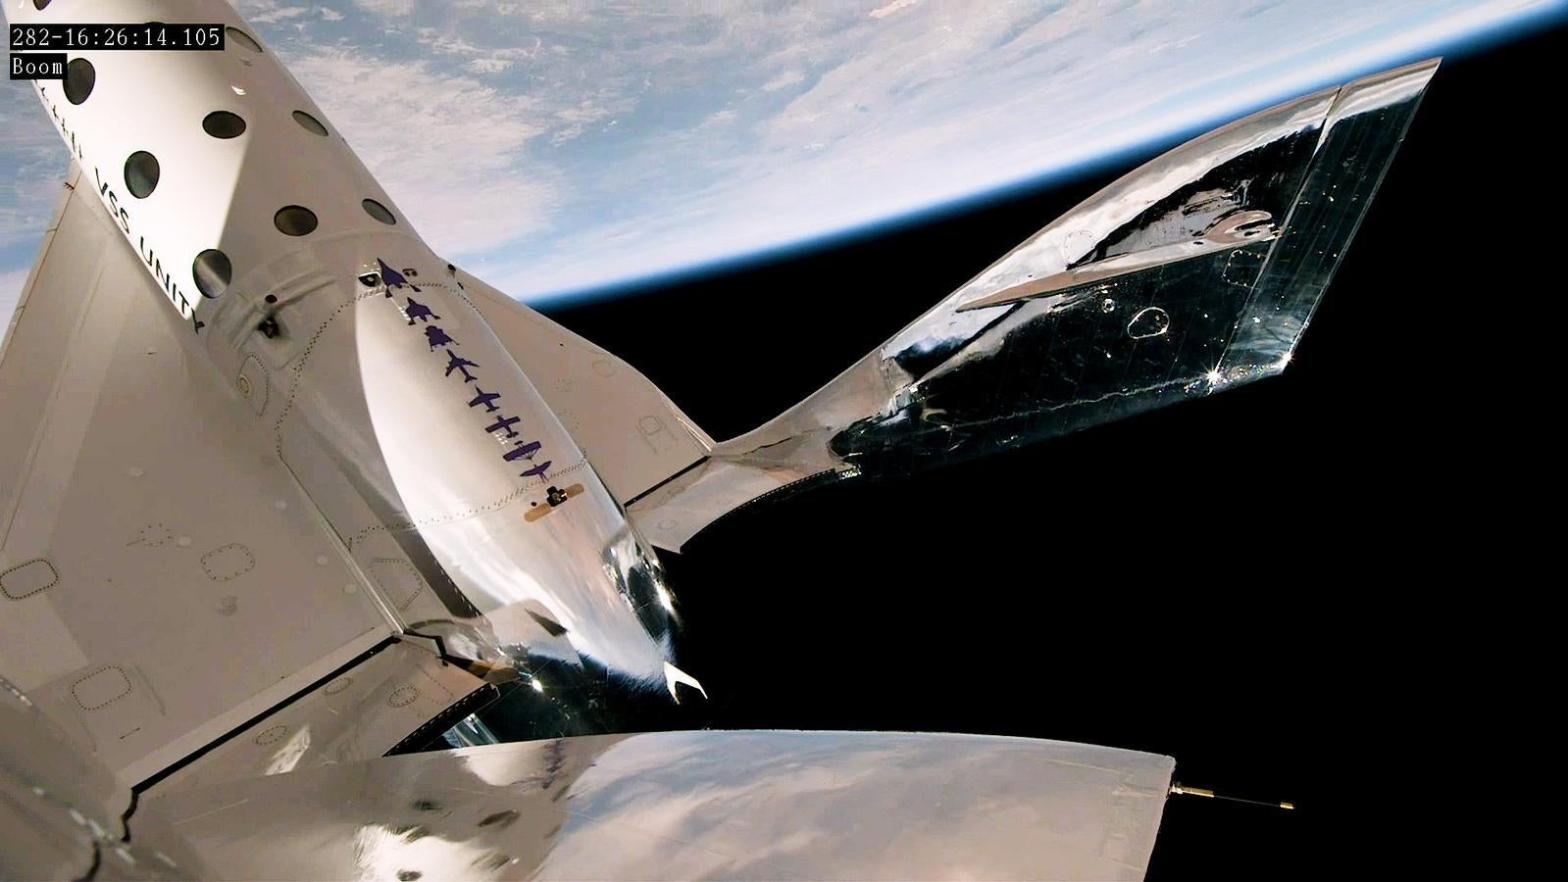 Virgin Galactic's spaceplane reached an altitude of 54.2 miles (87.2 km) after its release from the aircraft carrier.  (Image: Virgin Galactic)